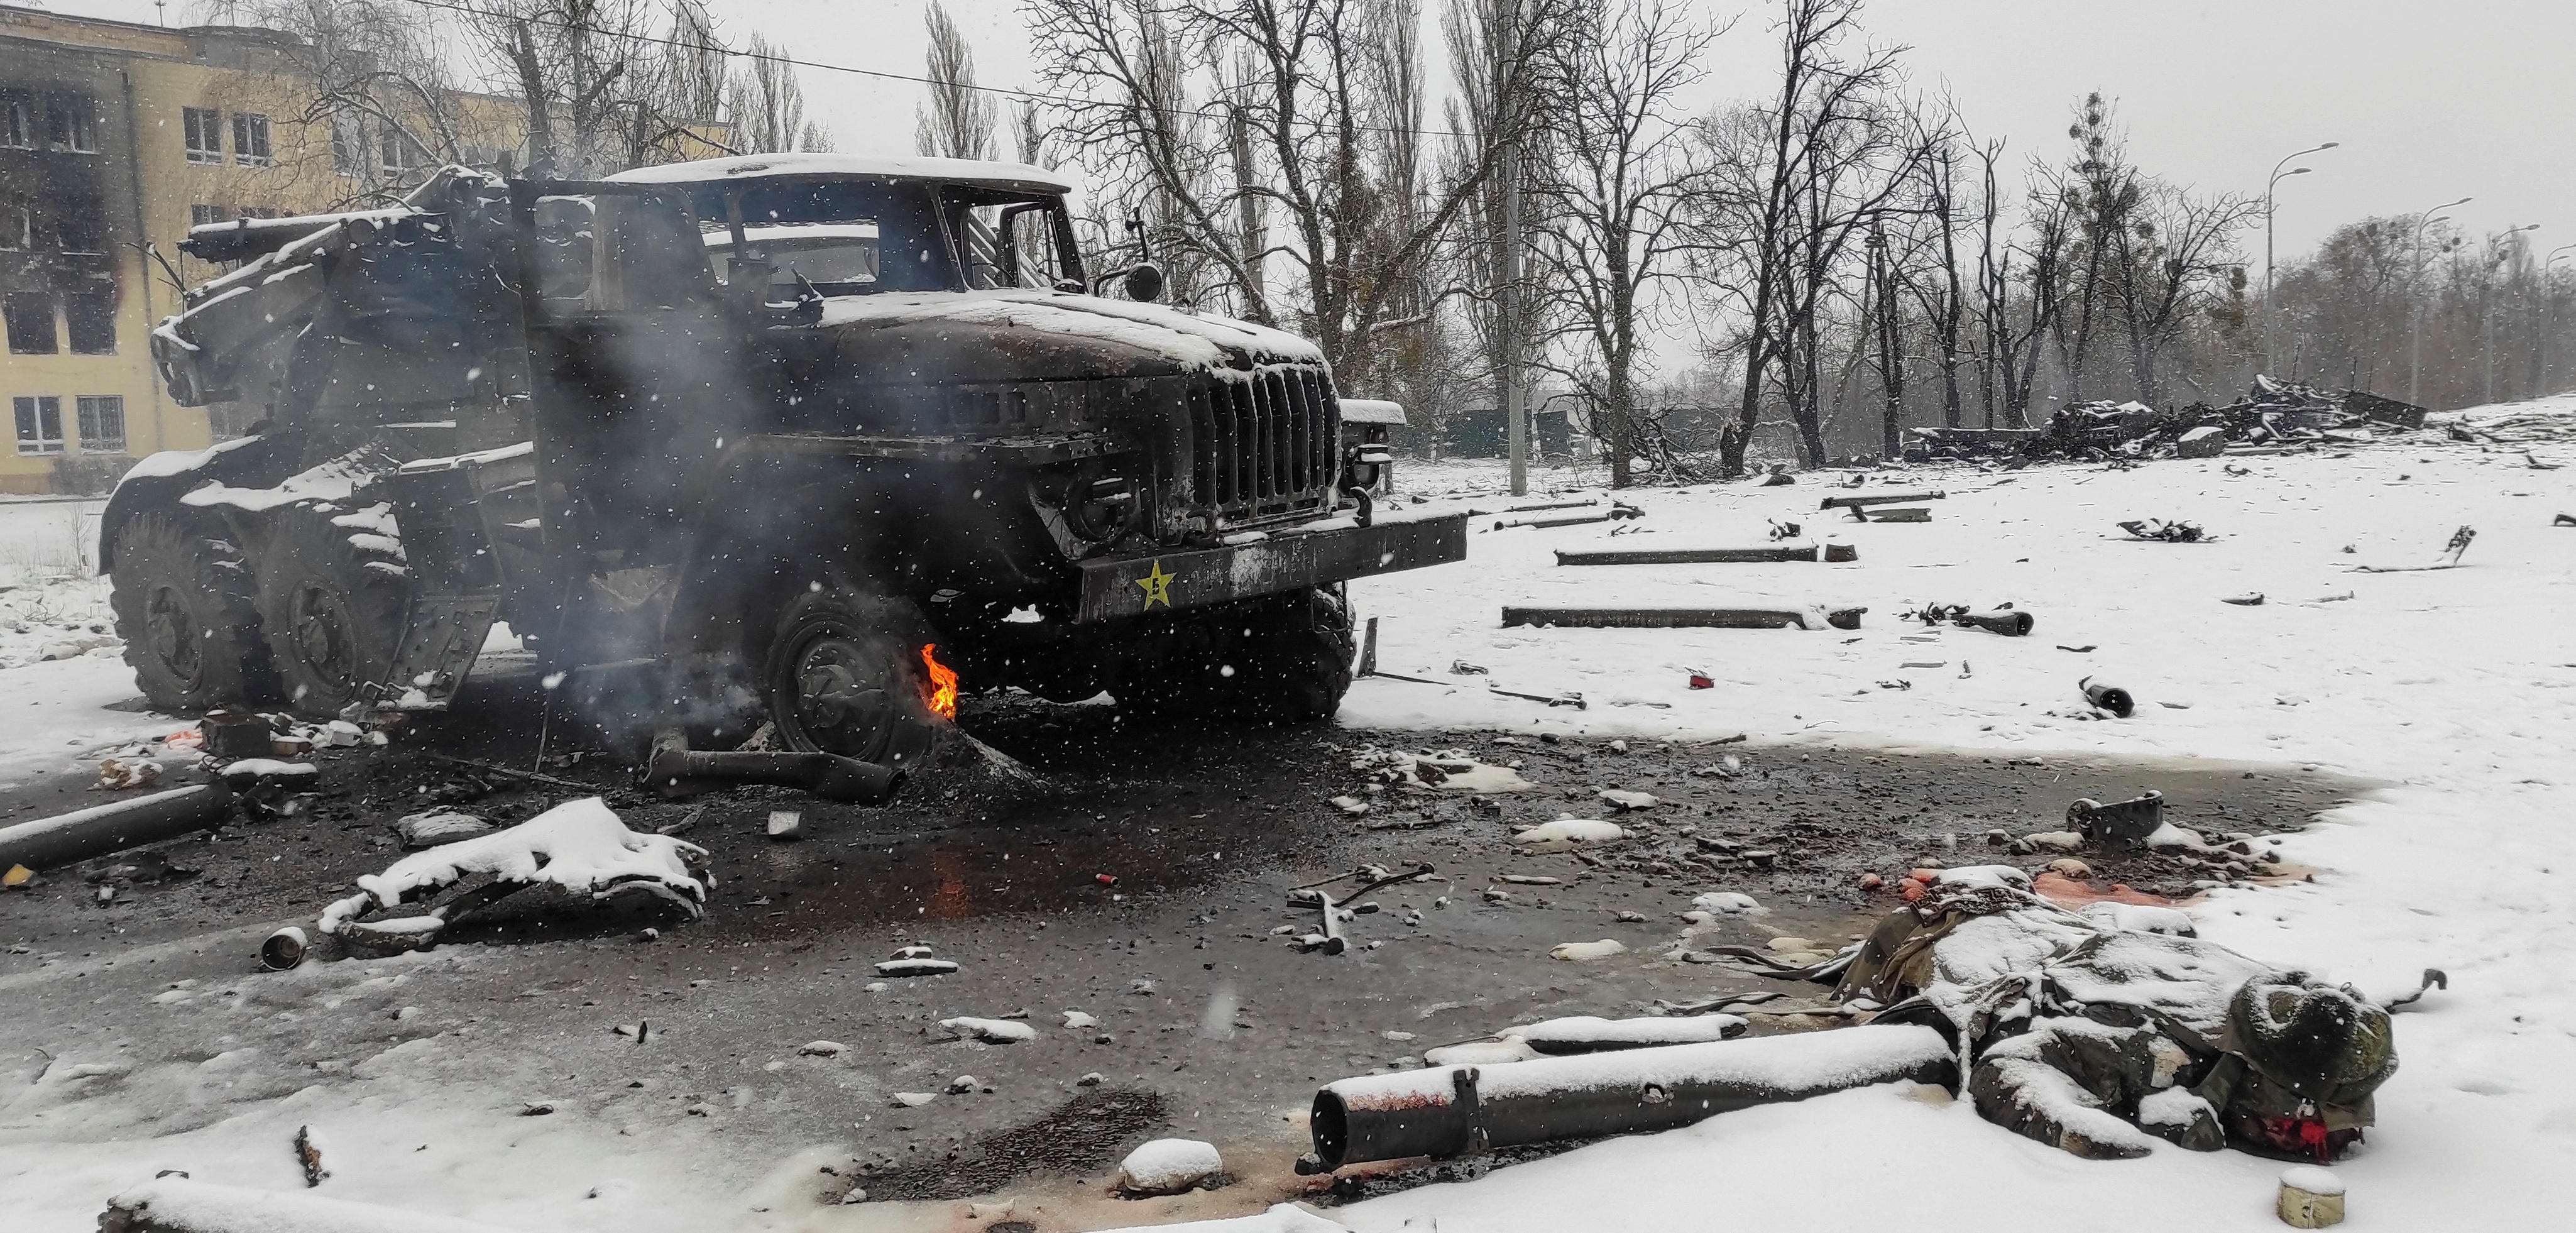 A view shows a destroyed Russian Army multiple rocket launcher in Kharkiv